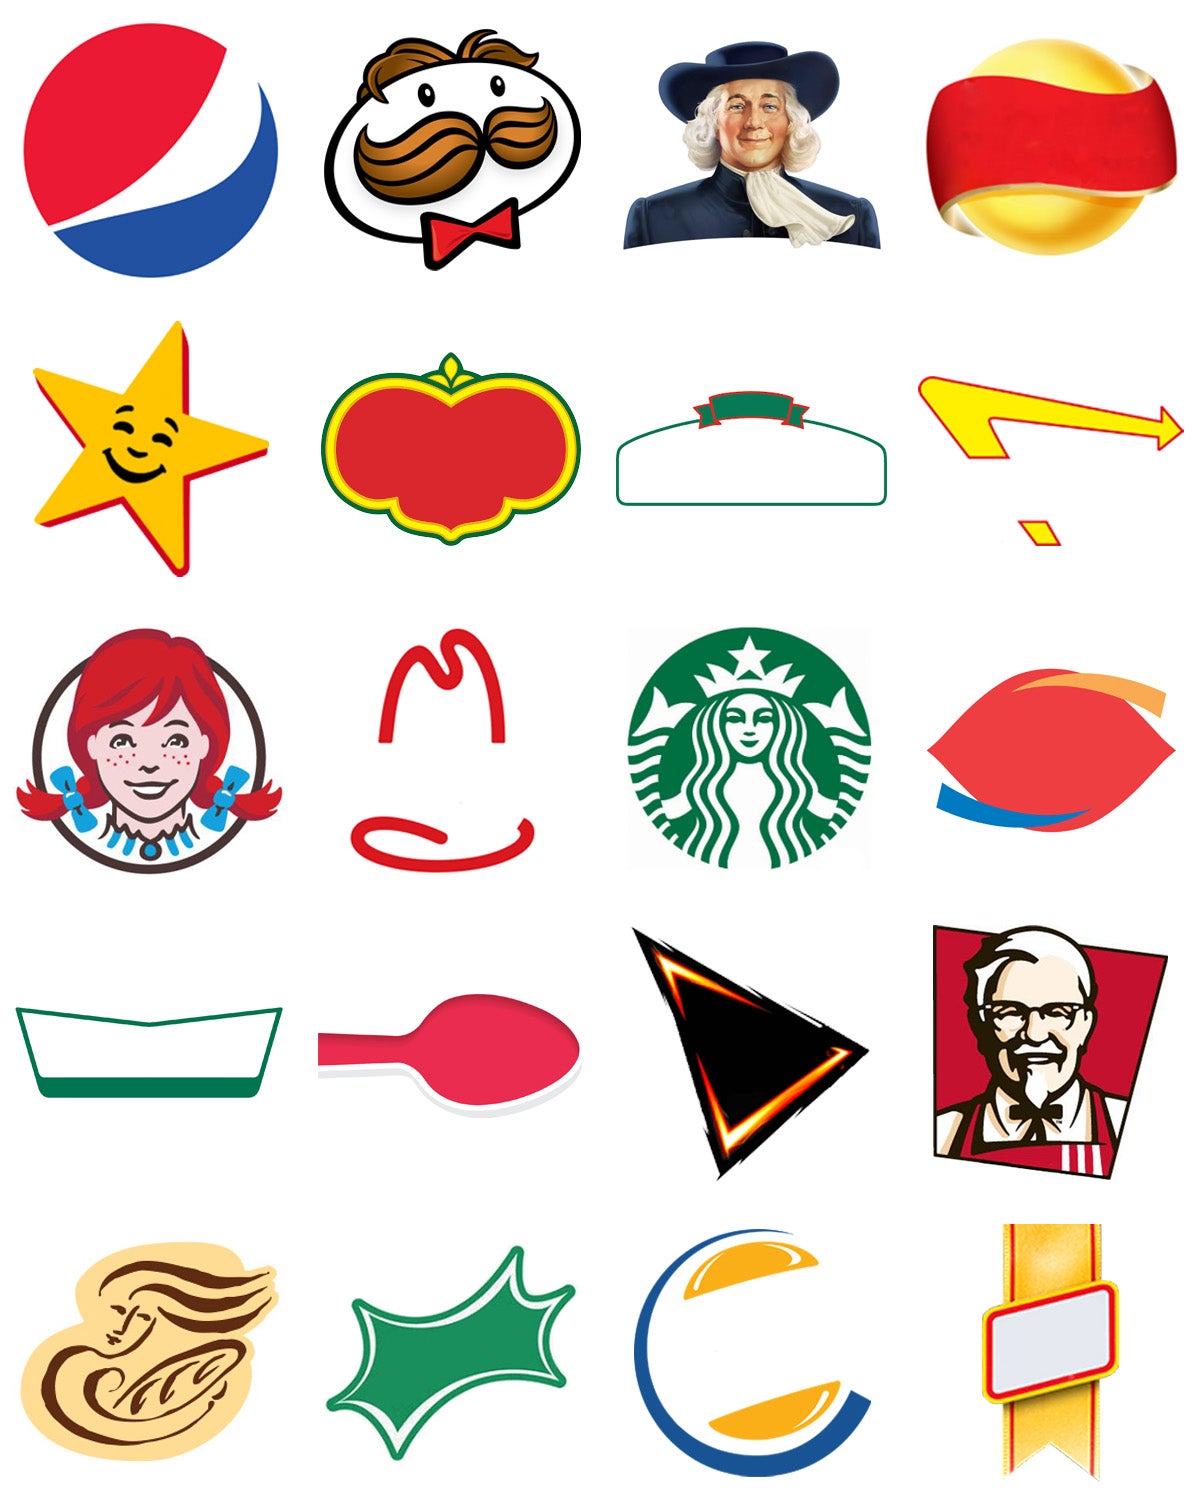 How Many Food Logos Can You Identify